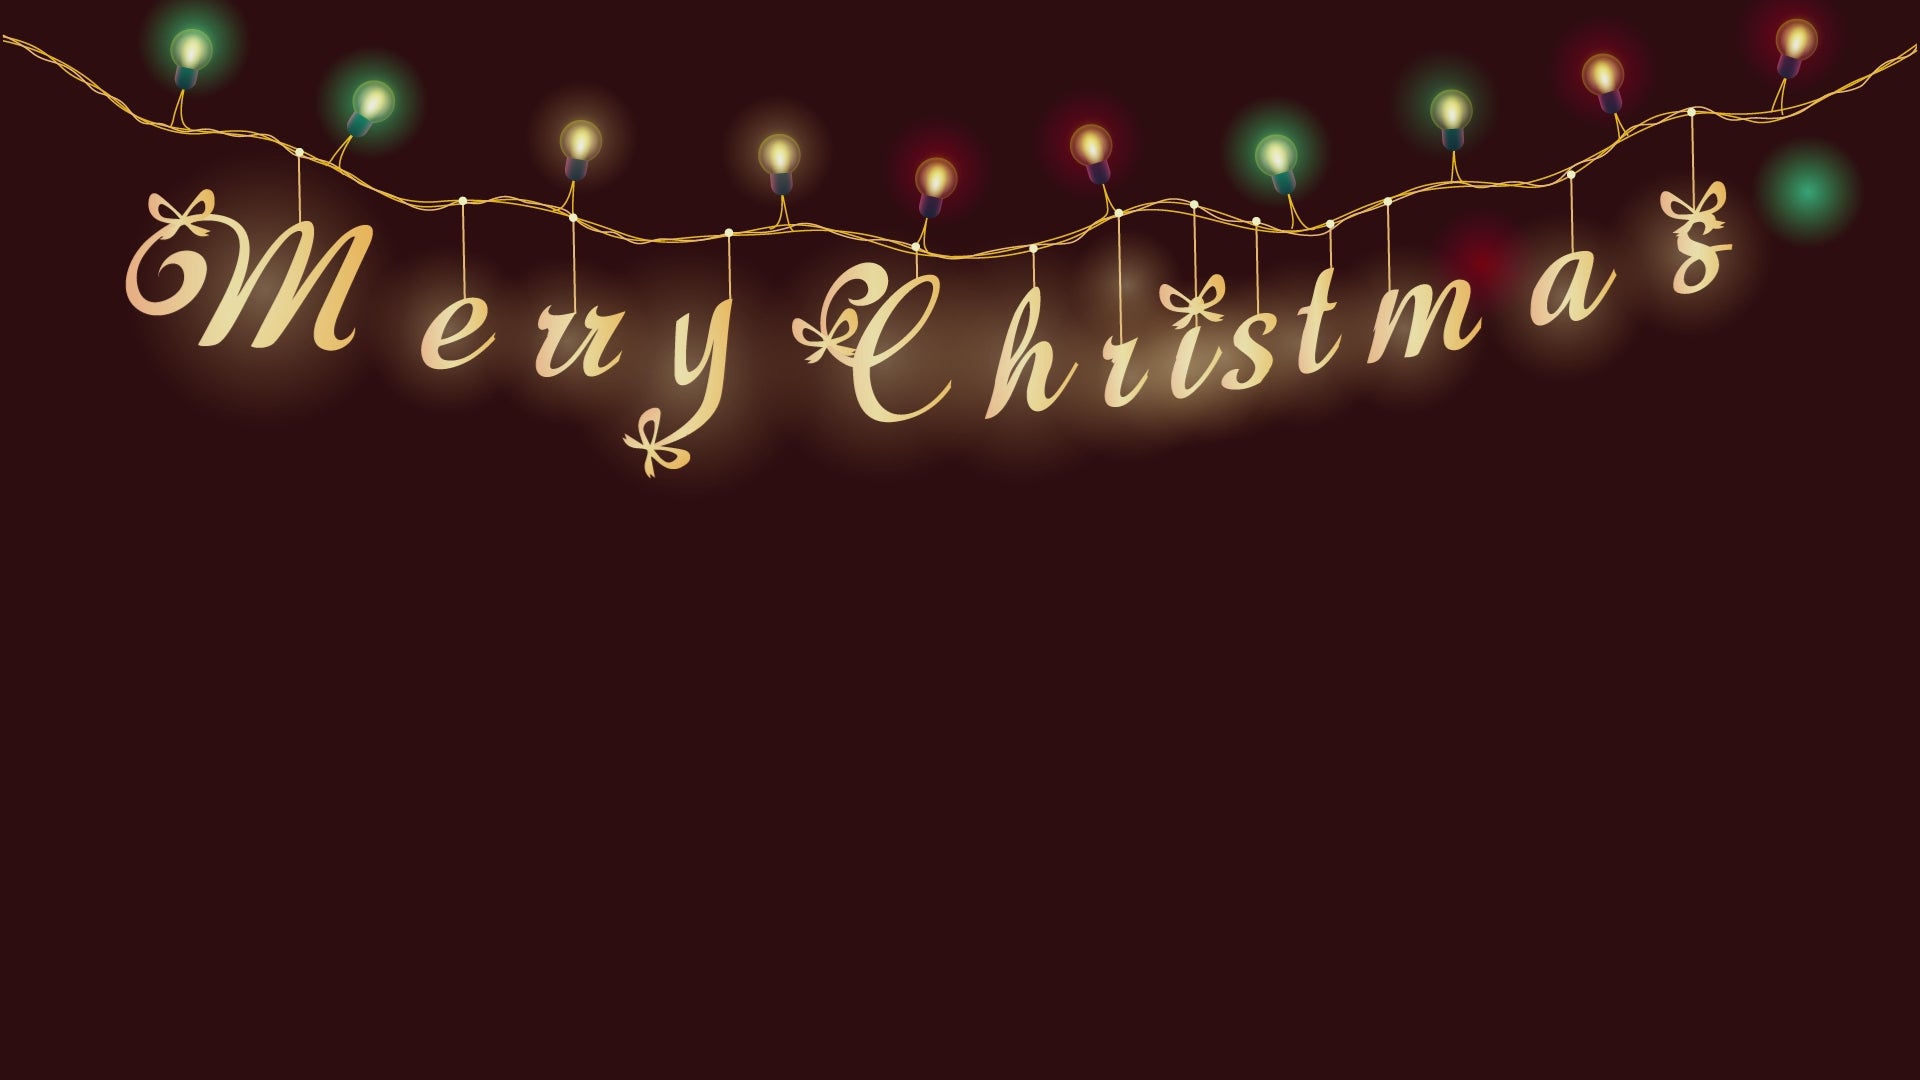 Merry Christmas Light Chain Animated Stream Decorations